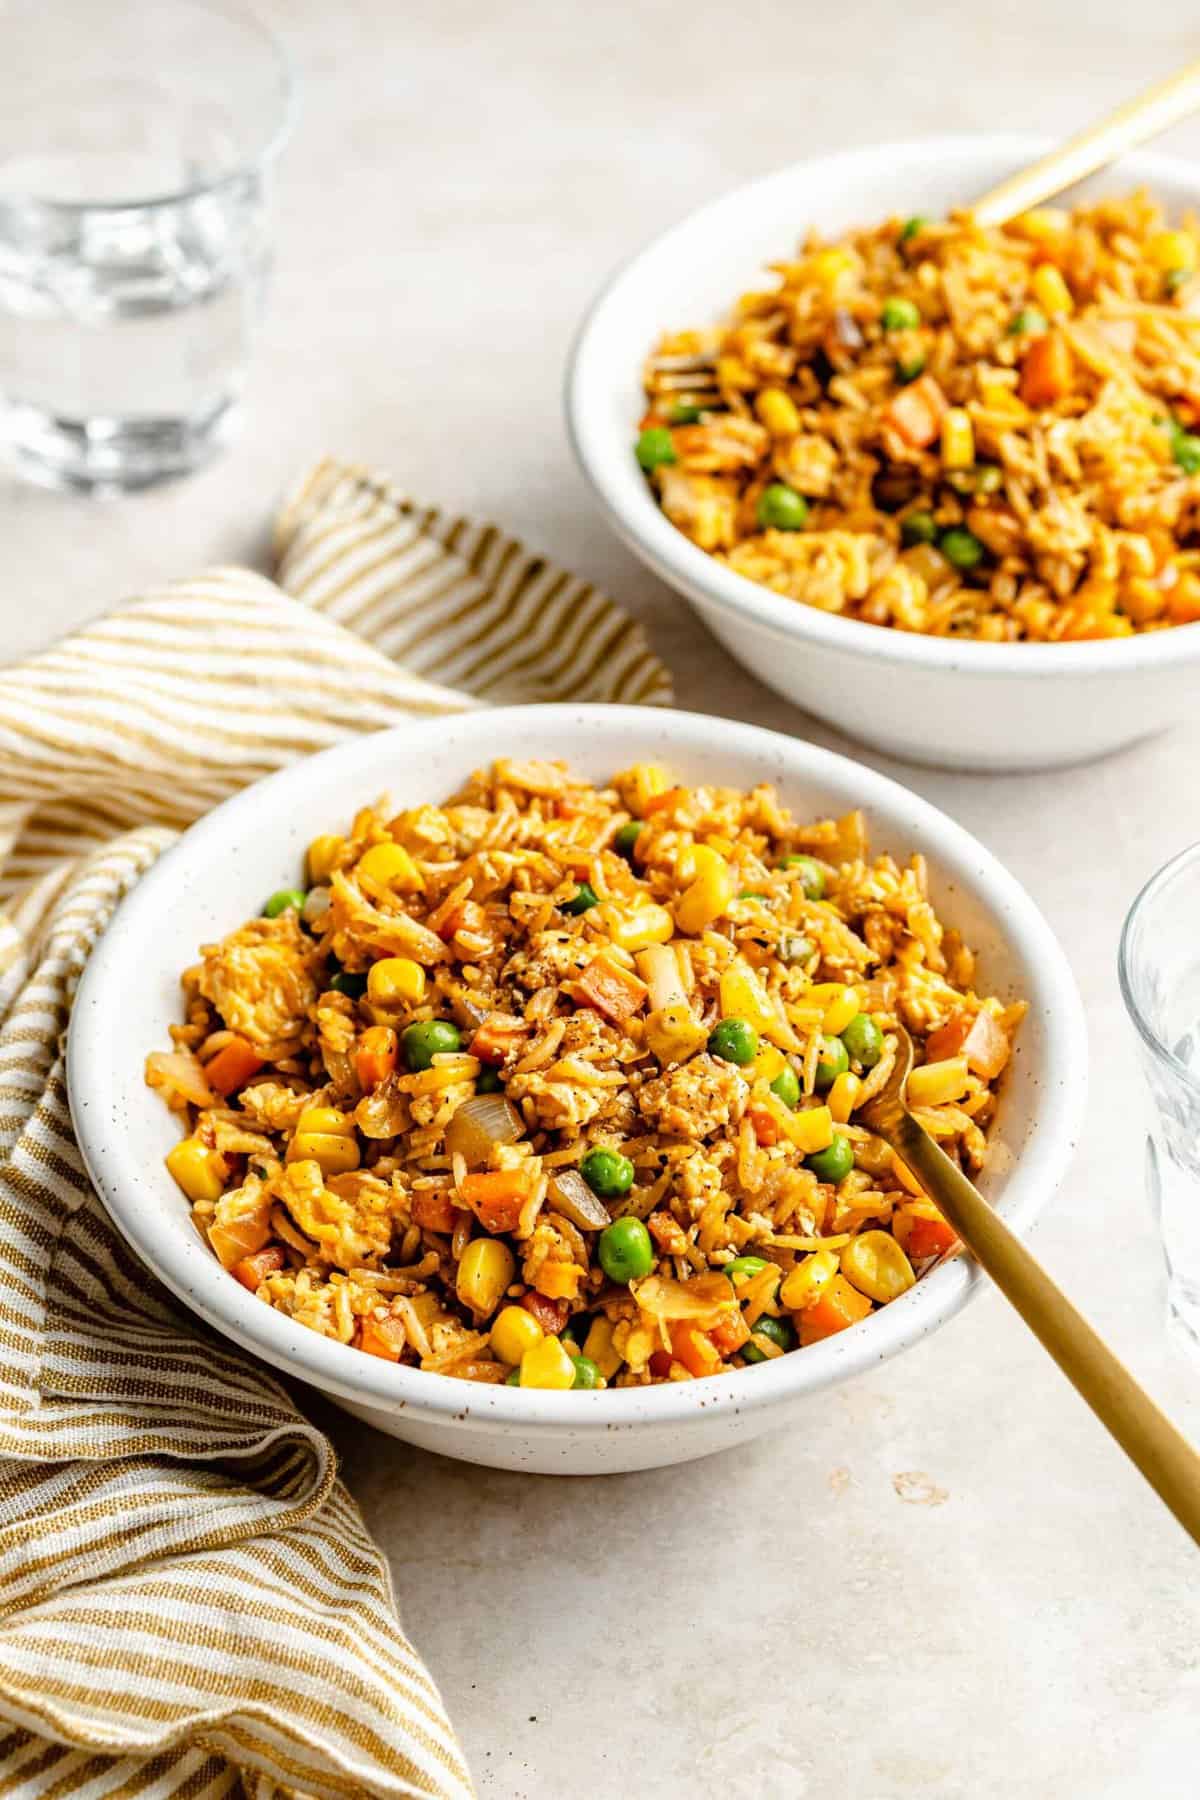 Vegetable fried rice in bowls.